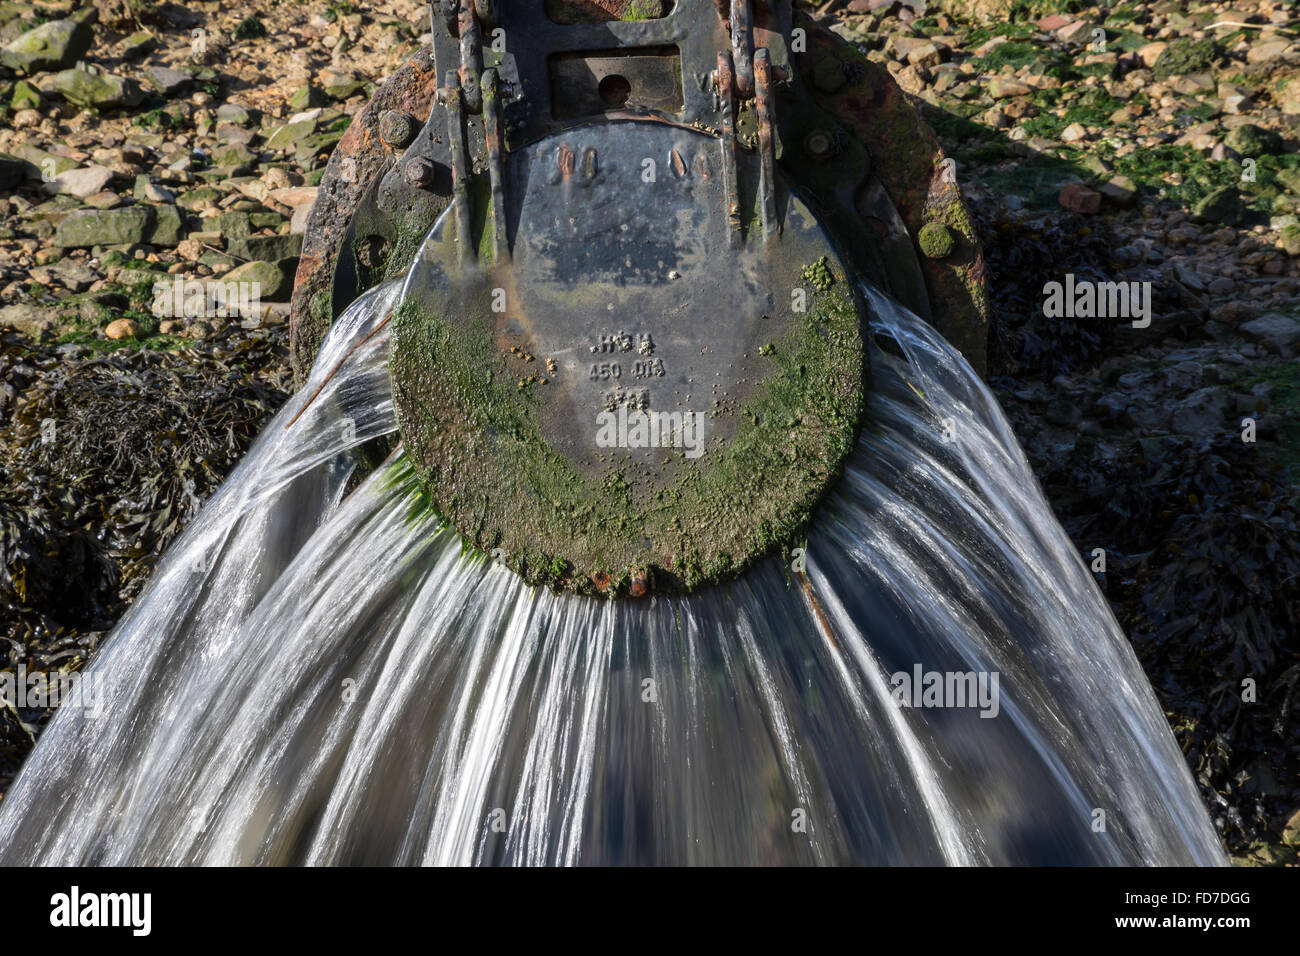 Waste water flows out of an outflow waste water pipe into the river in Devon UK Stock Photo